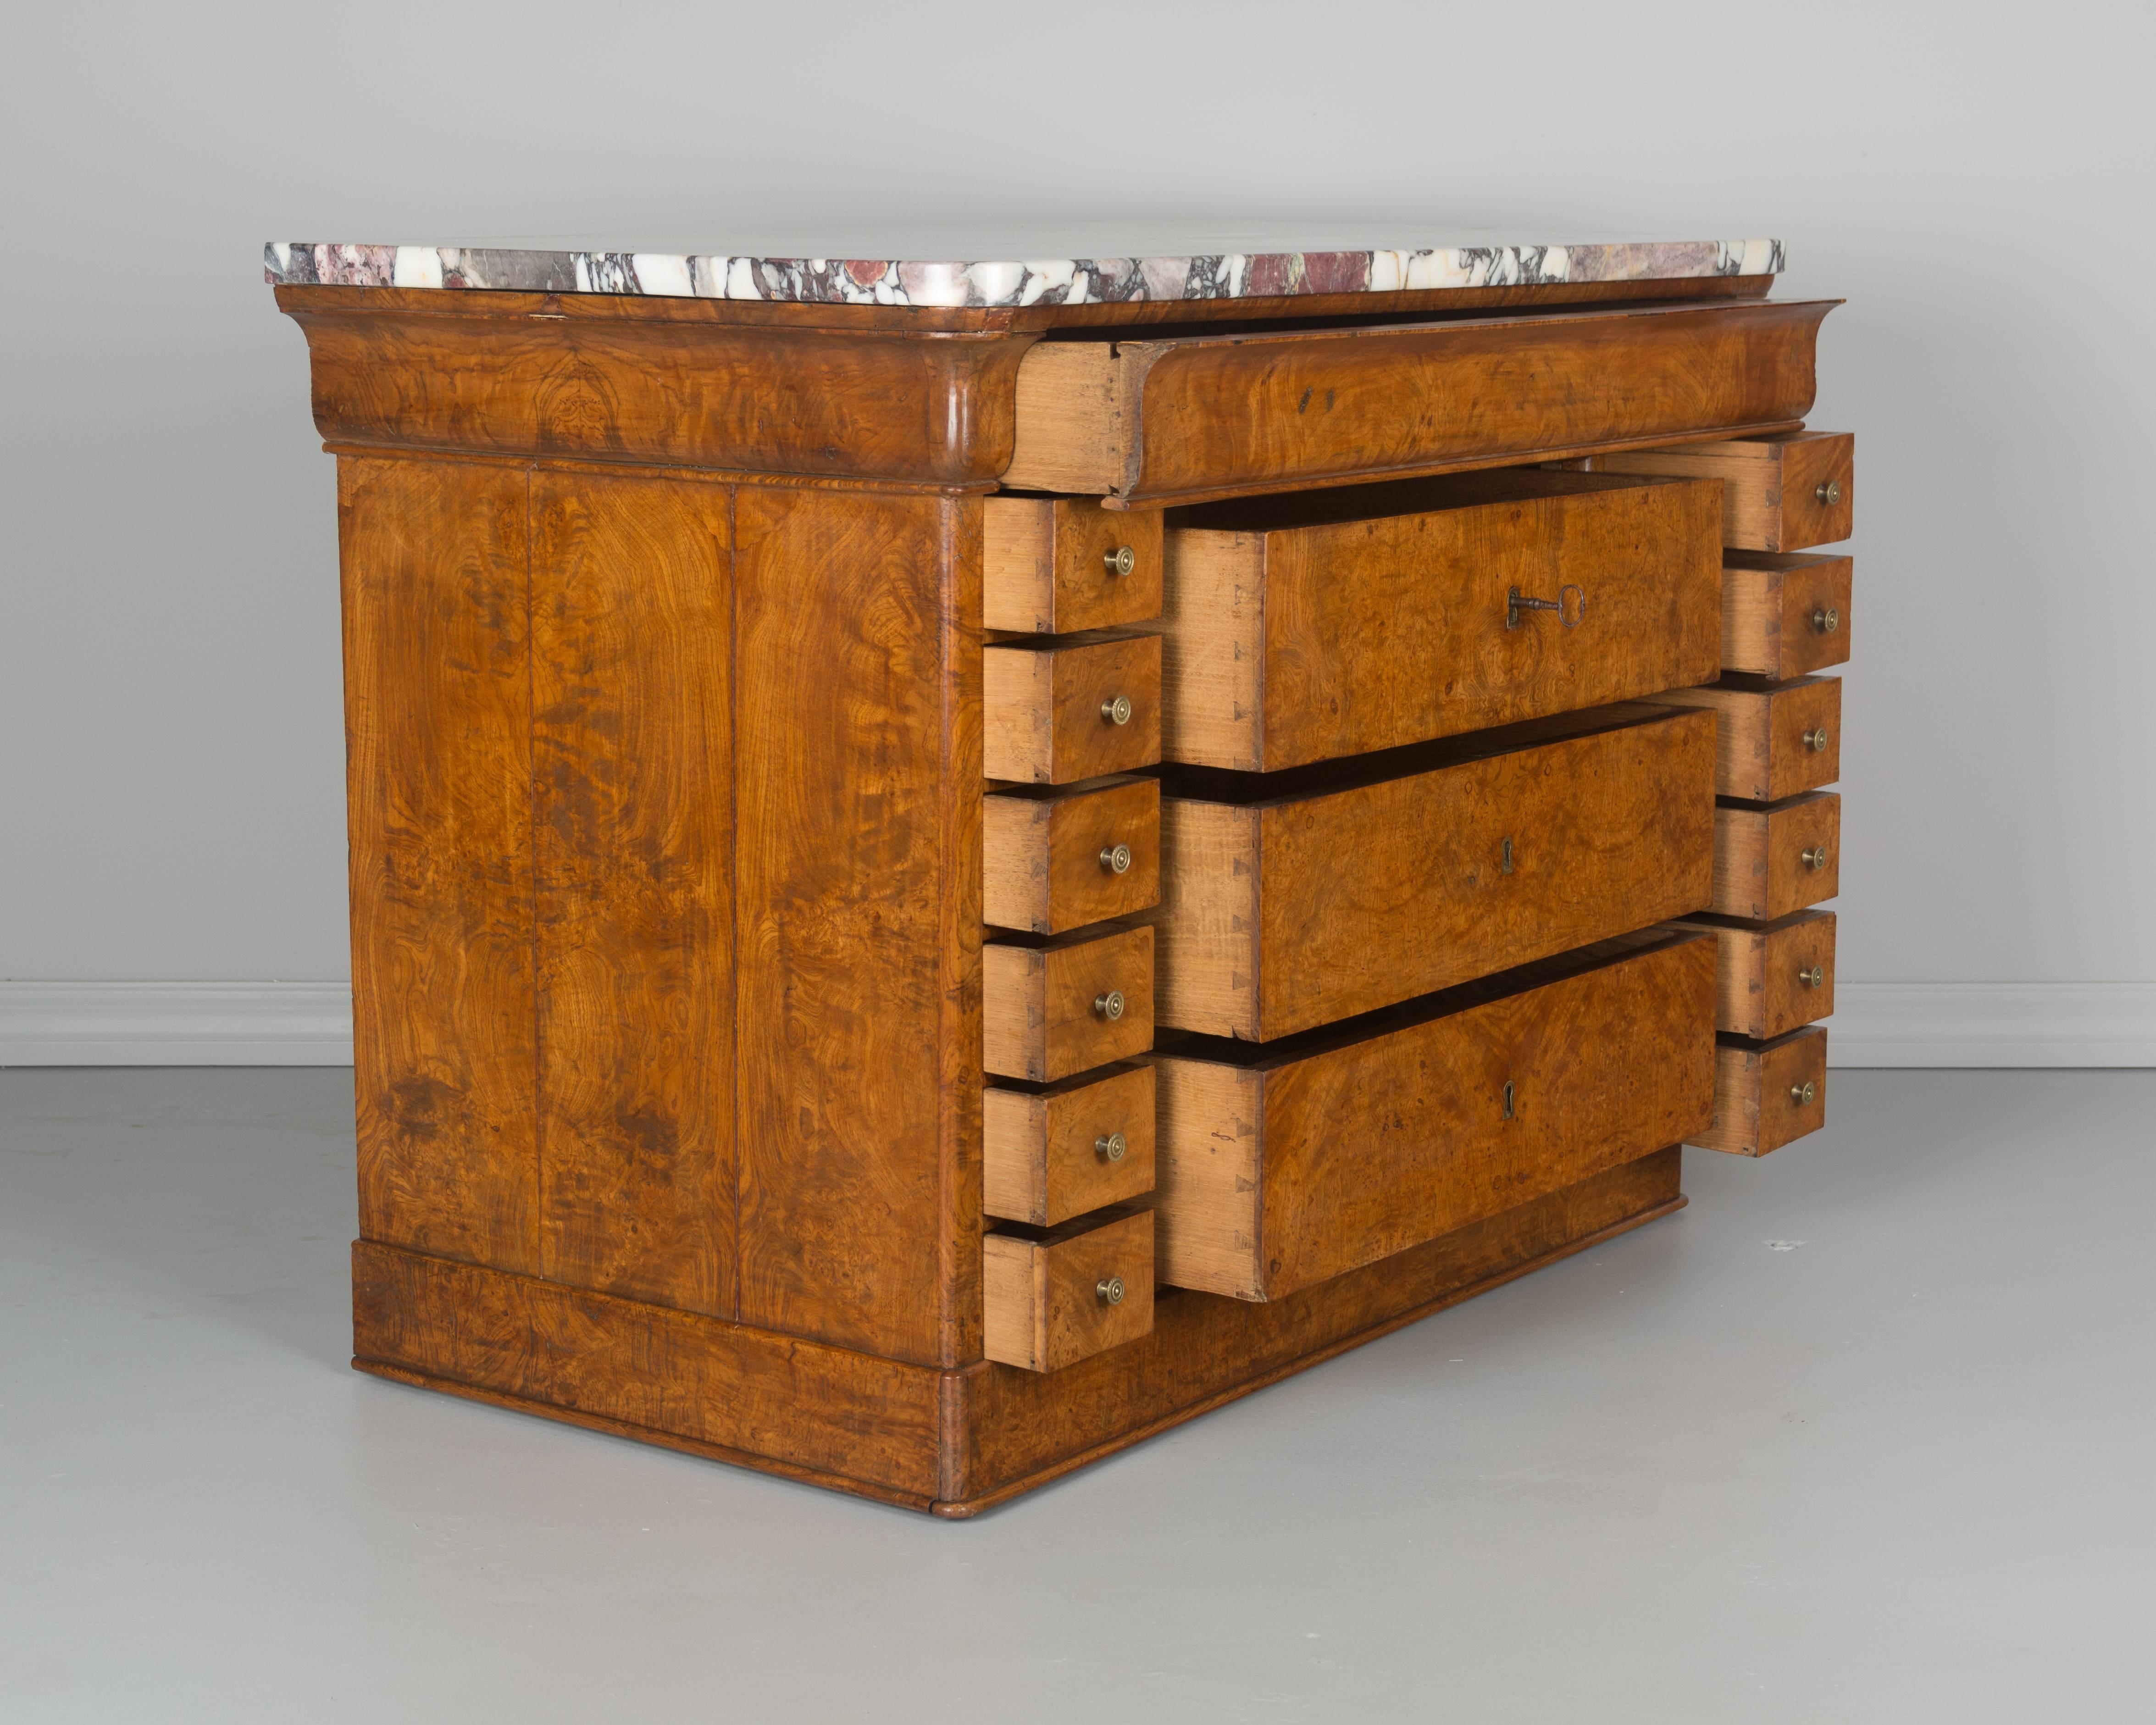 An early 19th century French Charles X commode made of veneer of bird's eye maple over solid oak as a secondary wood. A very unusual chest with two rows of six small drawers flanking three drawers with locks and one shallow "hidden"